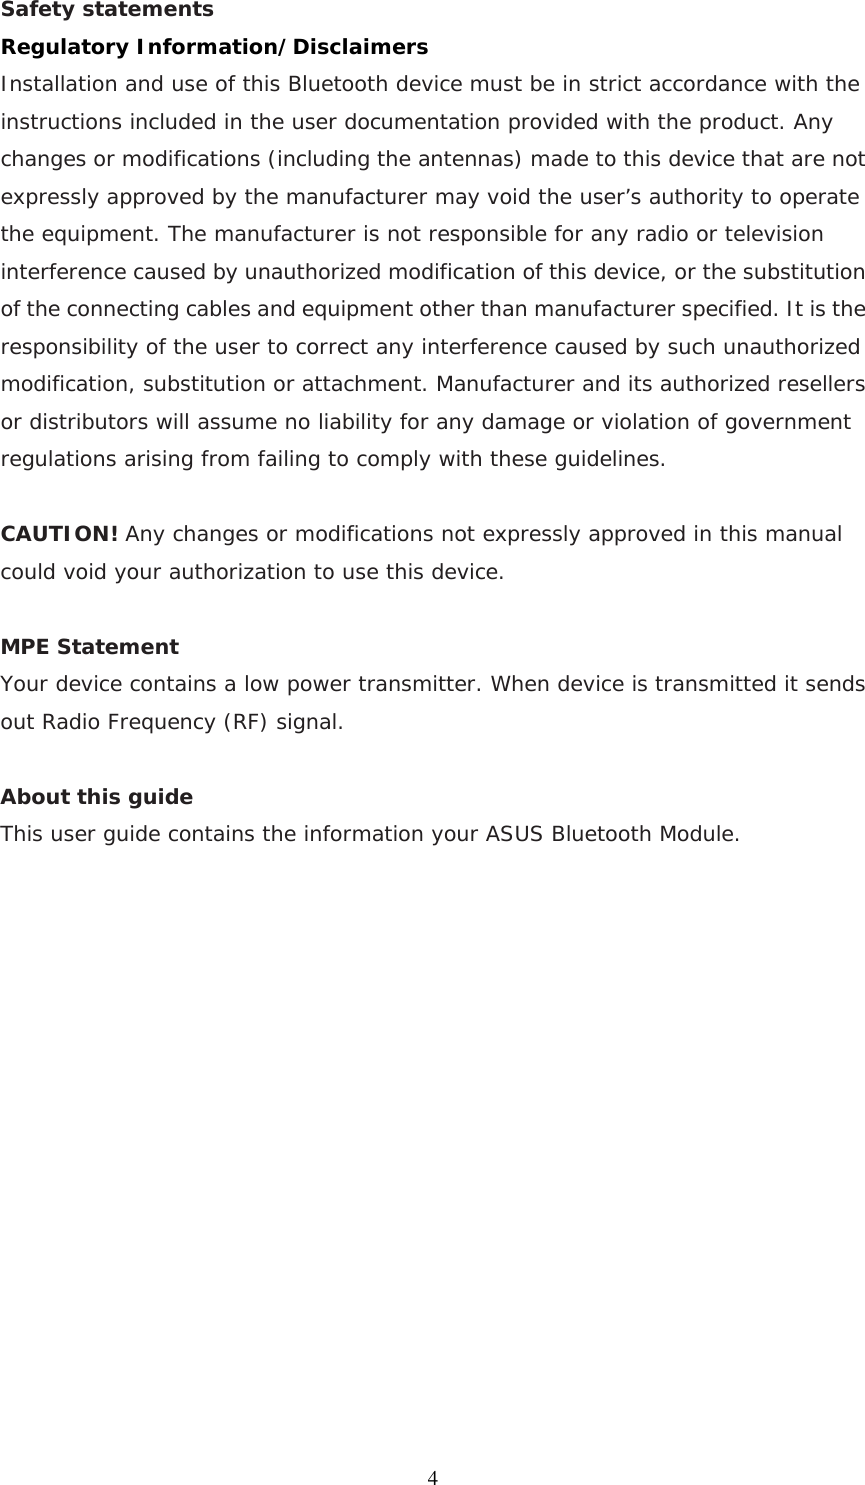 Safety statements   Regulatory Information/Disclaimers Installation and use of this Bluetooth device must be in strict accordance with the instructions included in the user documentation provided with the product. Any changes or modifications (including the antennas) made to this device that are not expressly approved by the manufacturer may void the user’s authority to operate the equipment. The manufacturer is not responsible for any radio or television interference caused by unauthorized modification of this device, or the substitution of the connecting cables and equipment other than manufacturer specified. It is the responsibility of the user to correct any interference caused by such unauthorized modification, substitution or attachment. Manufacturer and its authorized resellers or distributors will assume no liability for any damage or violation of government regulations arising from failing to comply with these guidelines.  CAUTION! Any changes or modifications not expressly approved in this manual could void your authorization to use this device.  MPE Statement Your device contains a low power transmitter. When device is transmitted it sends out Radio Frequency (RF) signal.   About this guide This user guide contains the information your ASUS Bluetooth Module.                 4